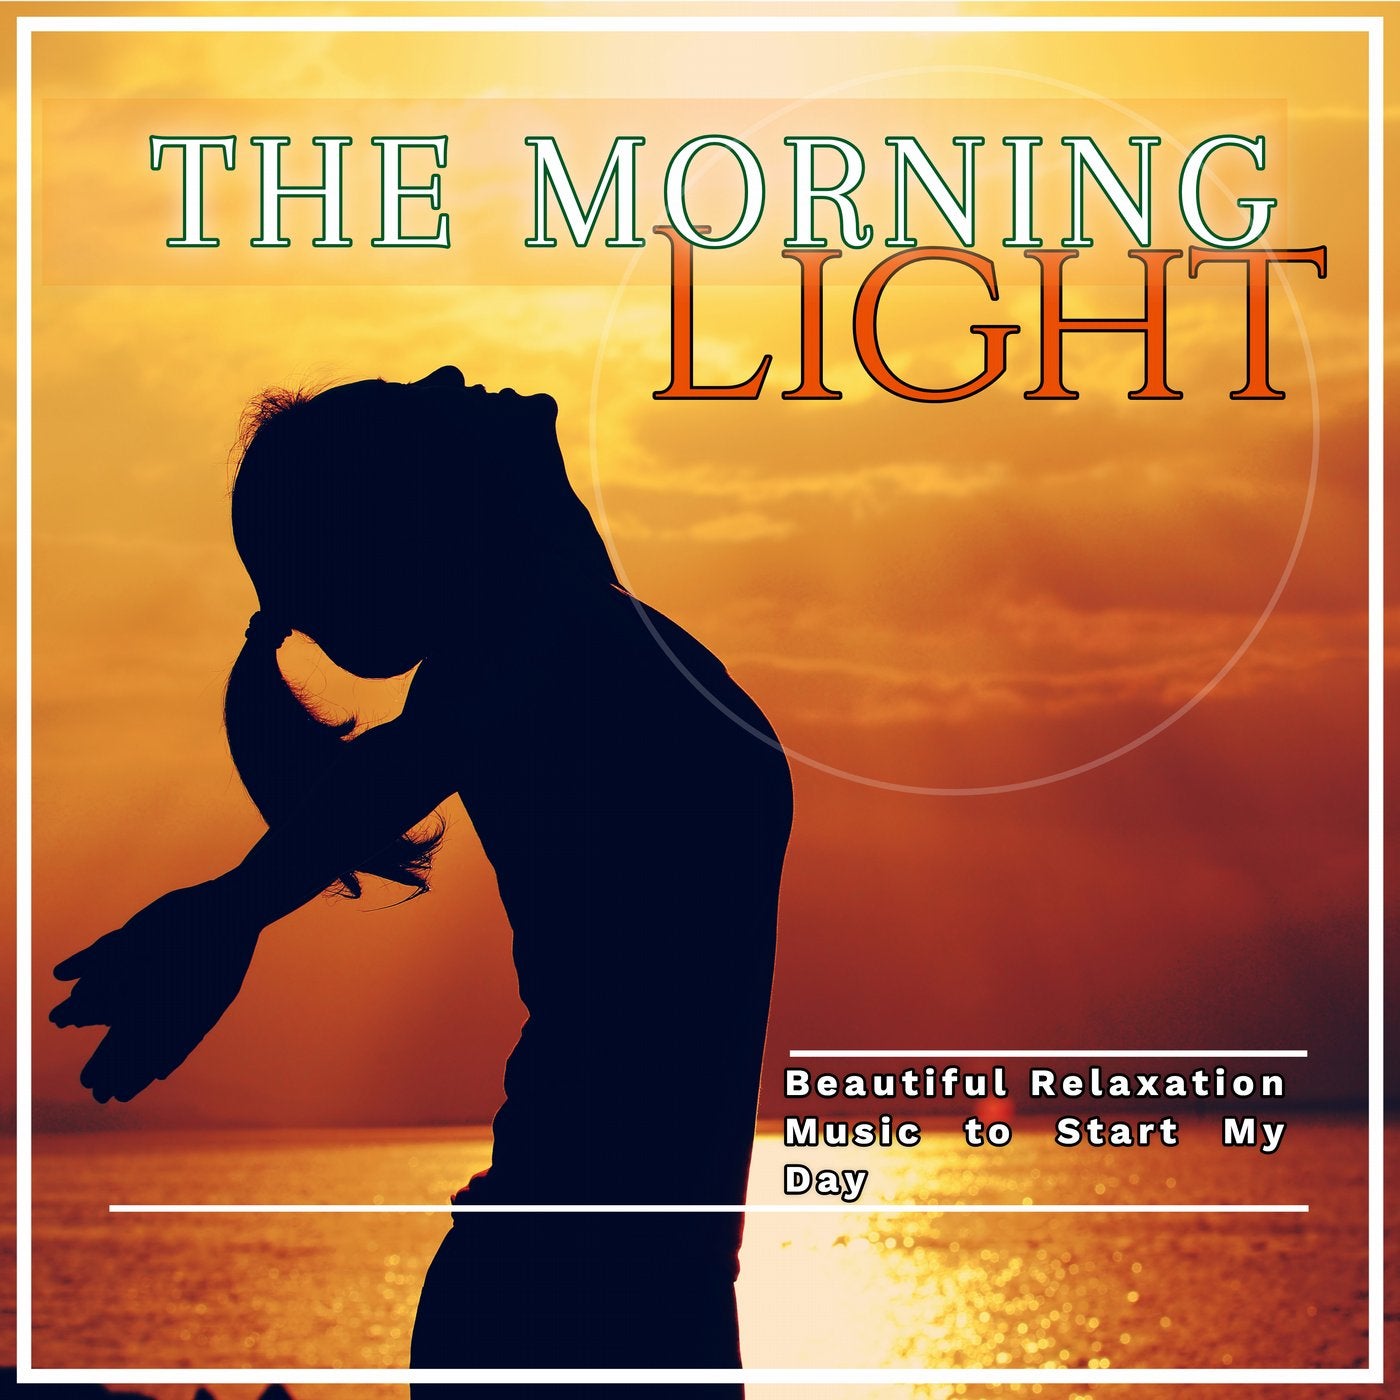 The Morning Light: Beautiful Relaxation Music to Start My Day